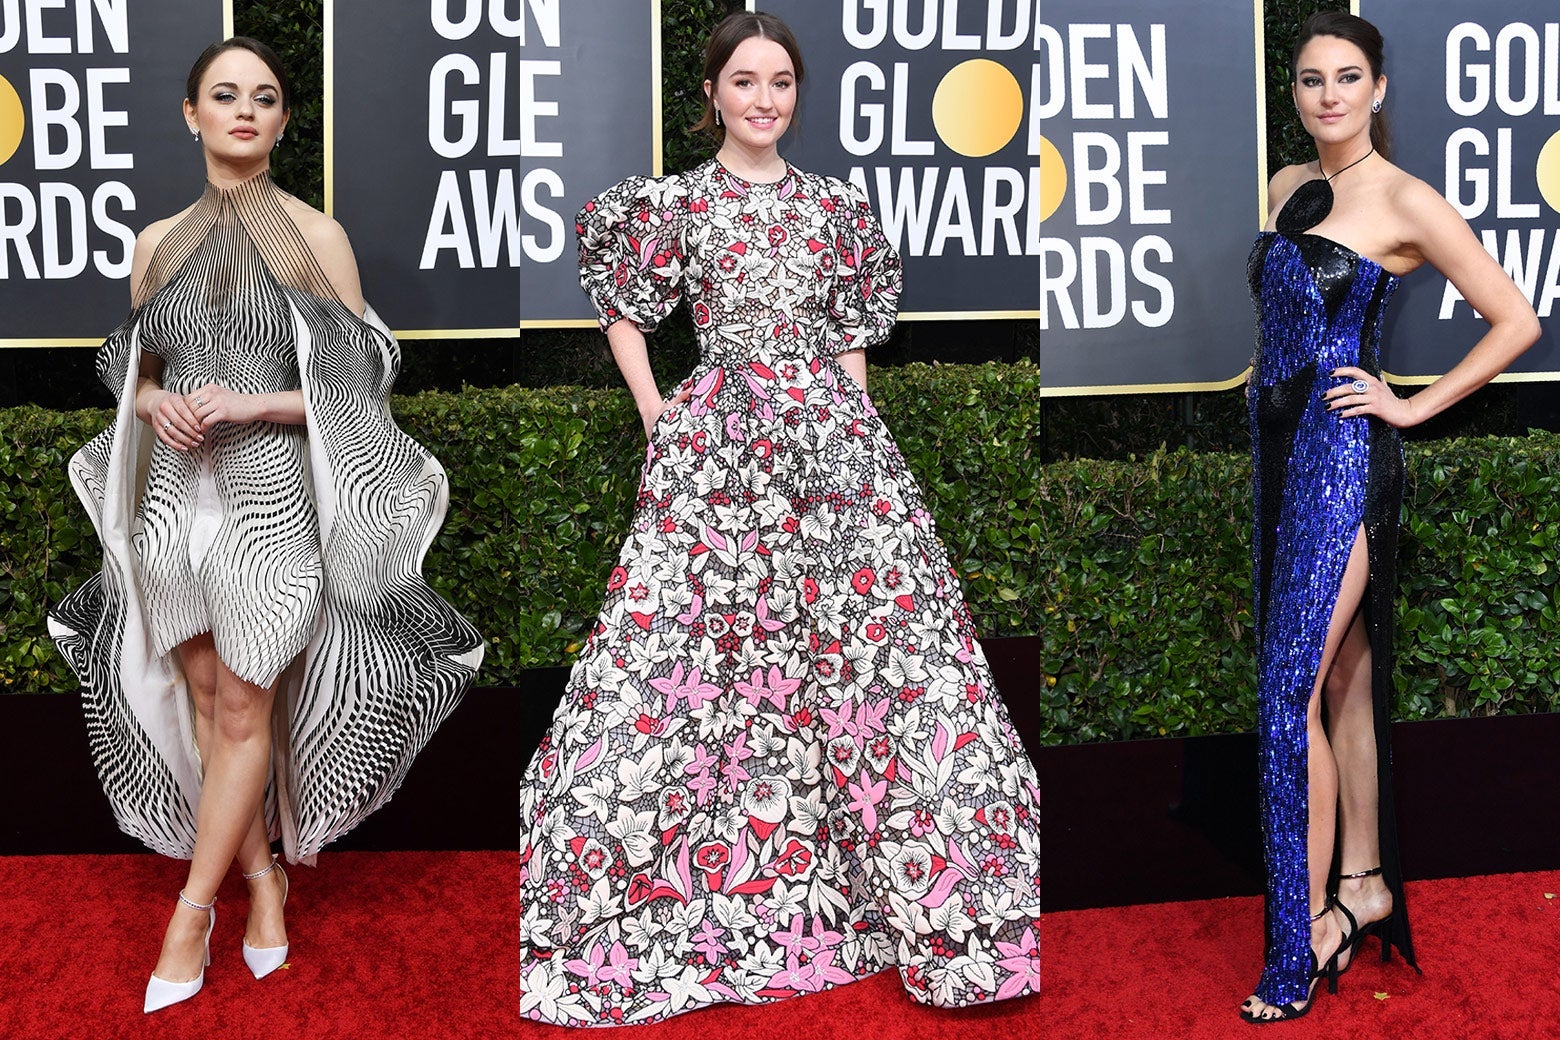 Joey King, Kaitlyn Dever, and Shailene Woodley pose on the 2020 Golden Globes red carpet.